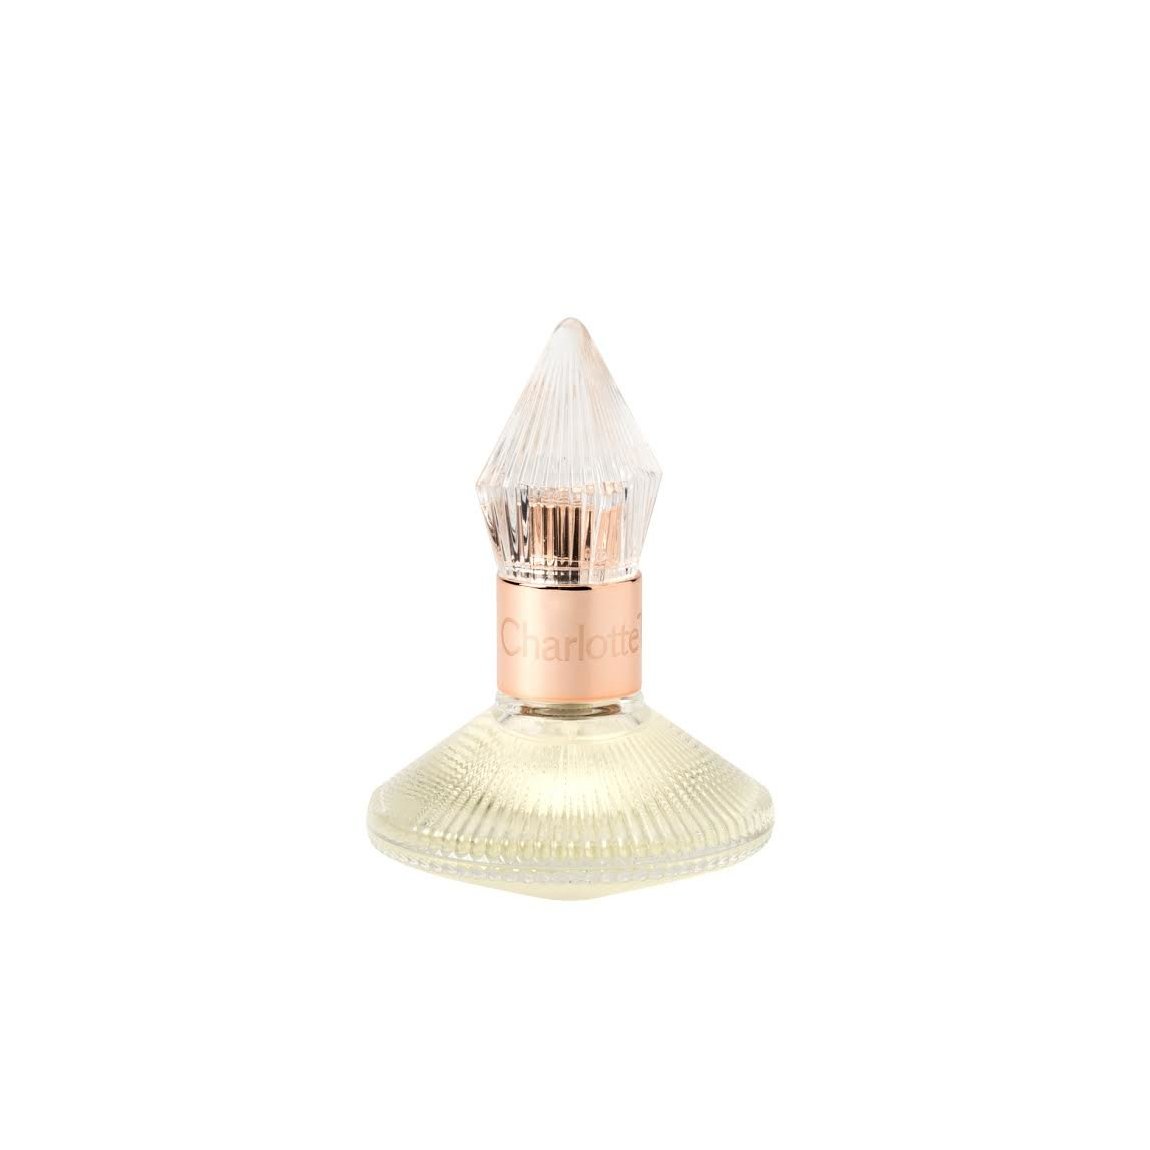 Charlotte Tilbury Scent of a Dream 30 ml alternative view 1 - product swatch.